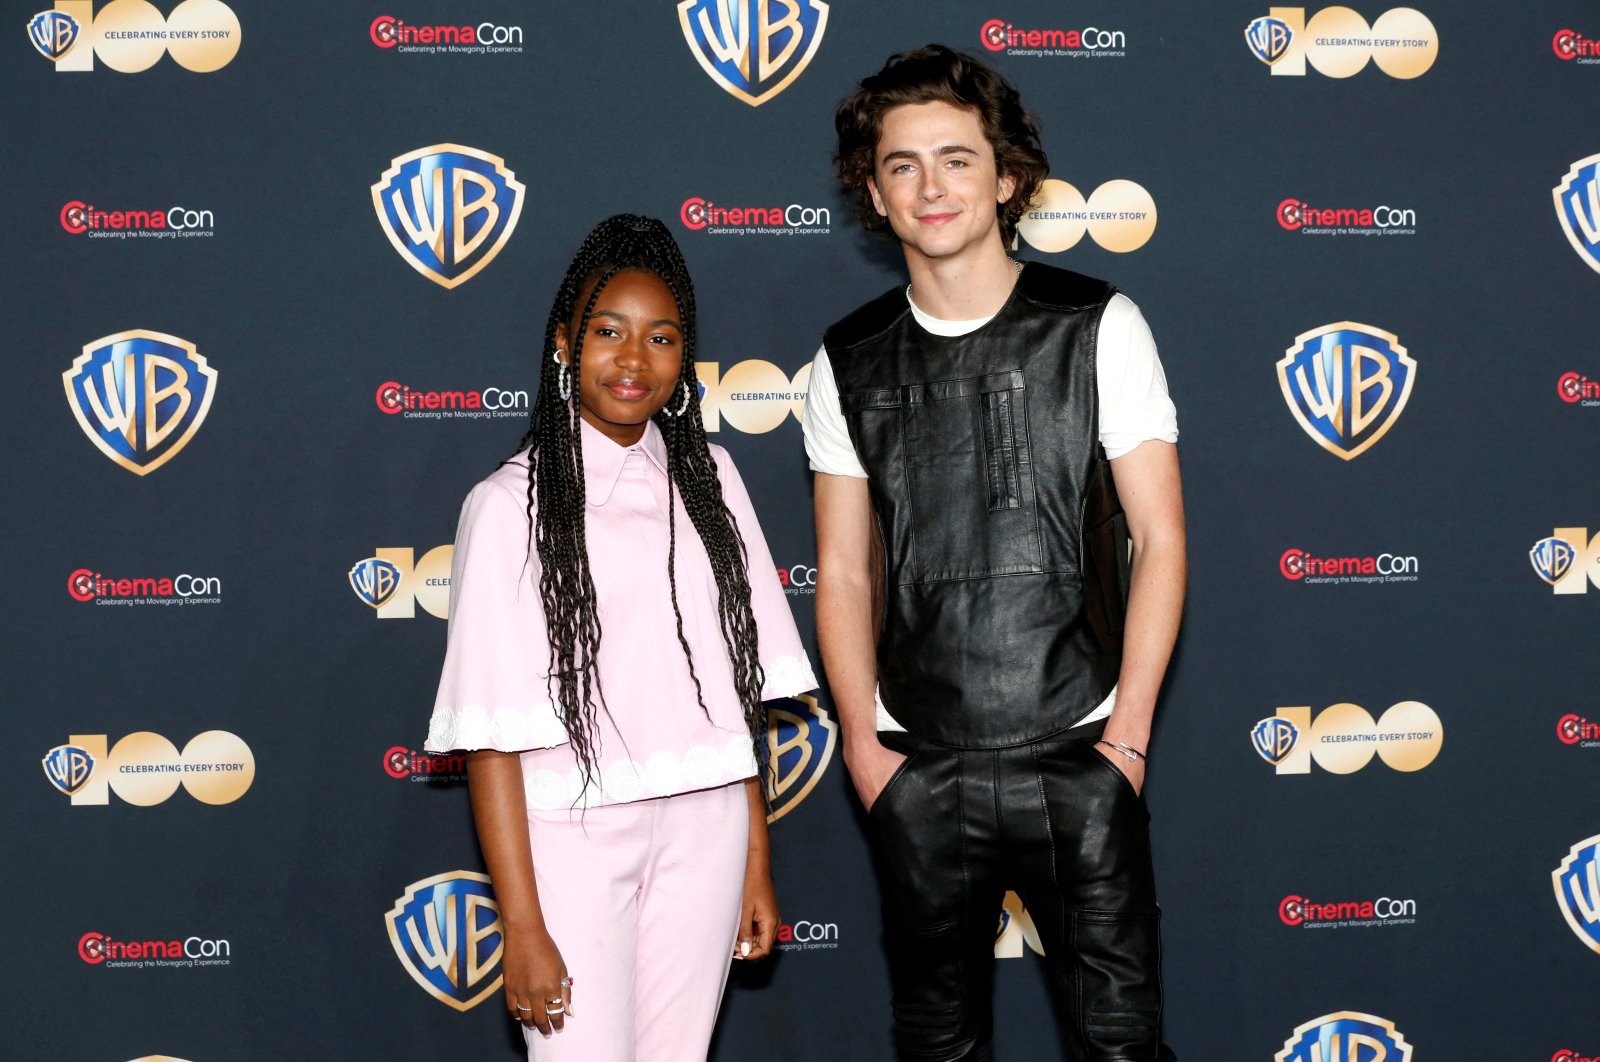 Calah Lane (L) and Timothee Chalamet, promoting the movie &quot;Wonka,&quot; attend a Warner Bros. presentation during CinemaCon, the official convention of the National Association of Theatre Owners, in Las Vegas, Nevada, U.S., April 25, 2023. (Reuters Photo)